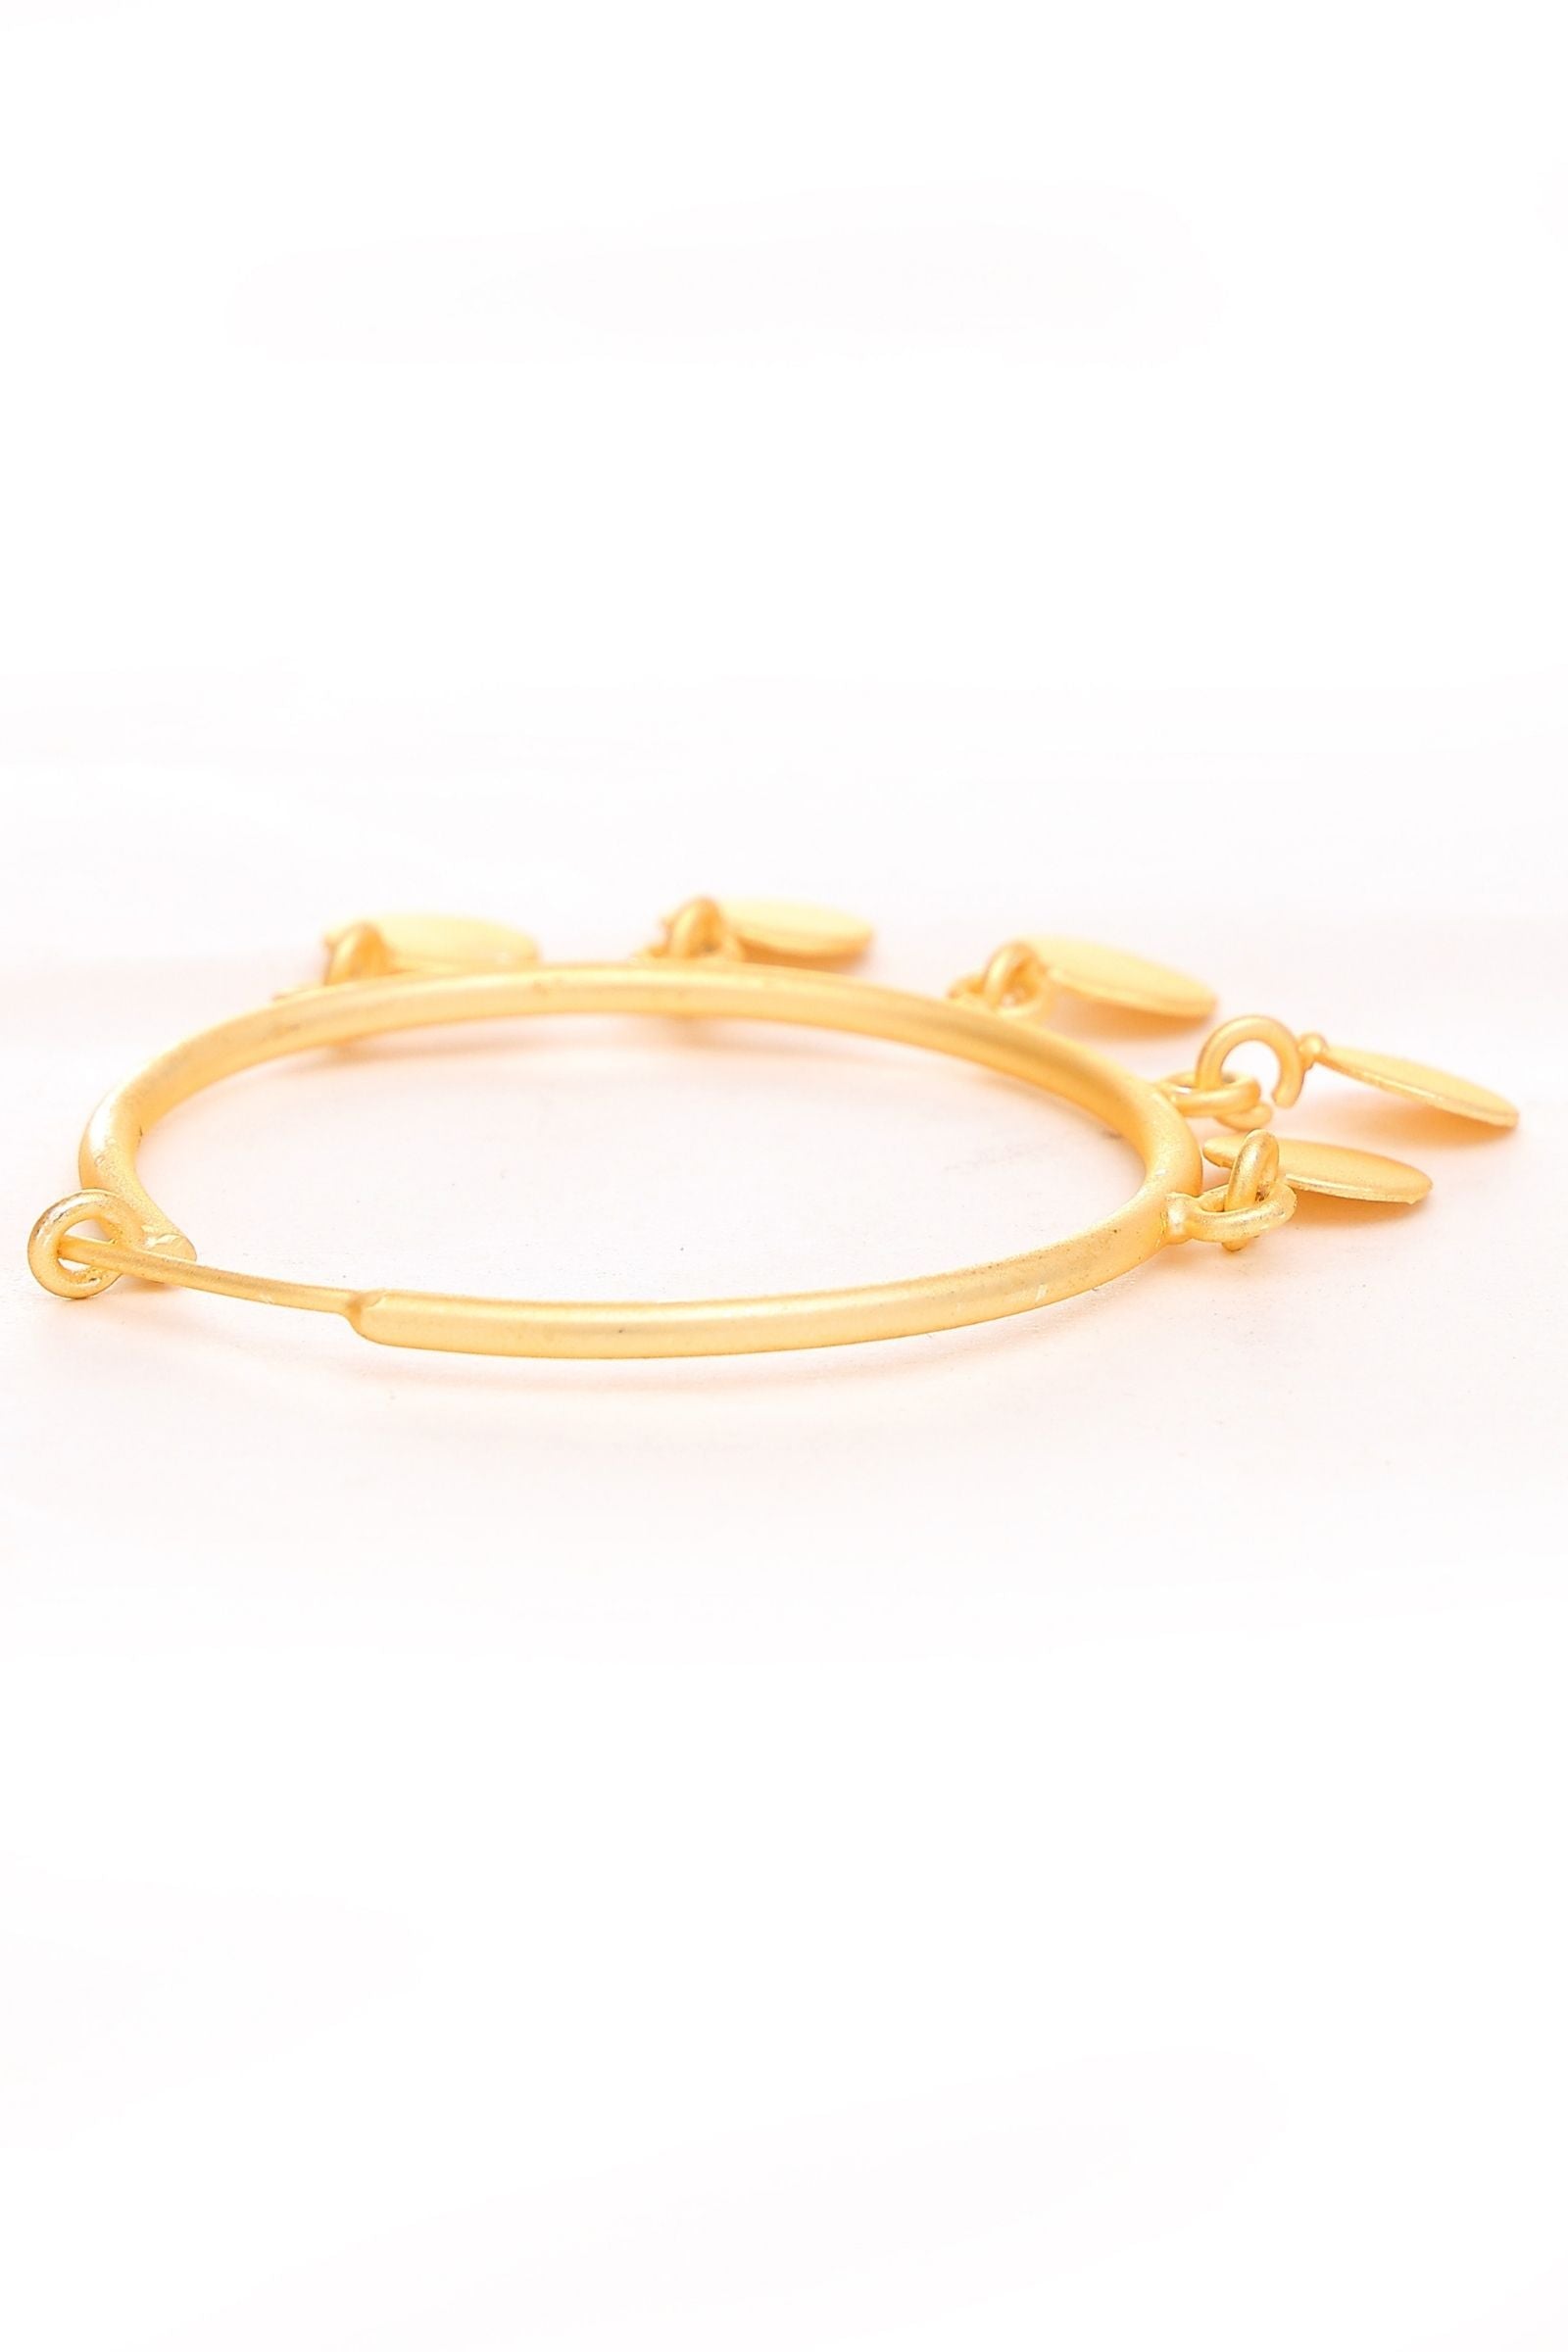 Gold Hoops with Small Hoops